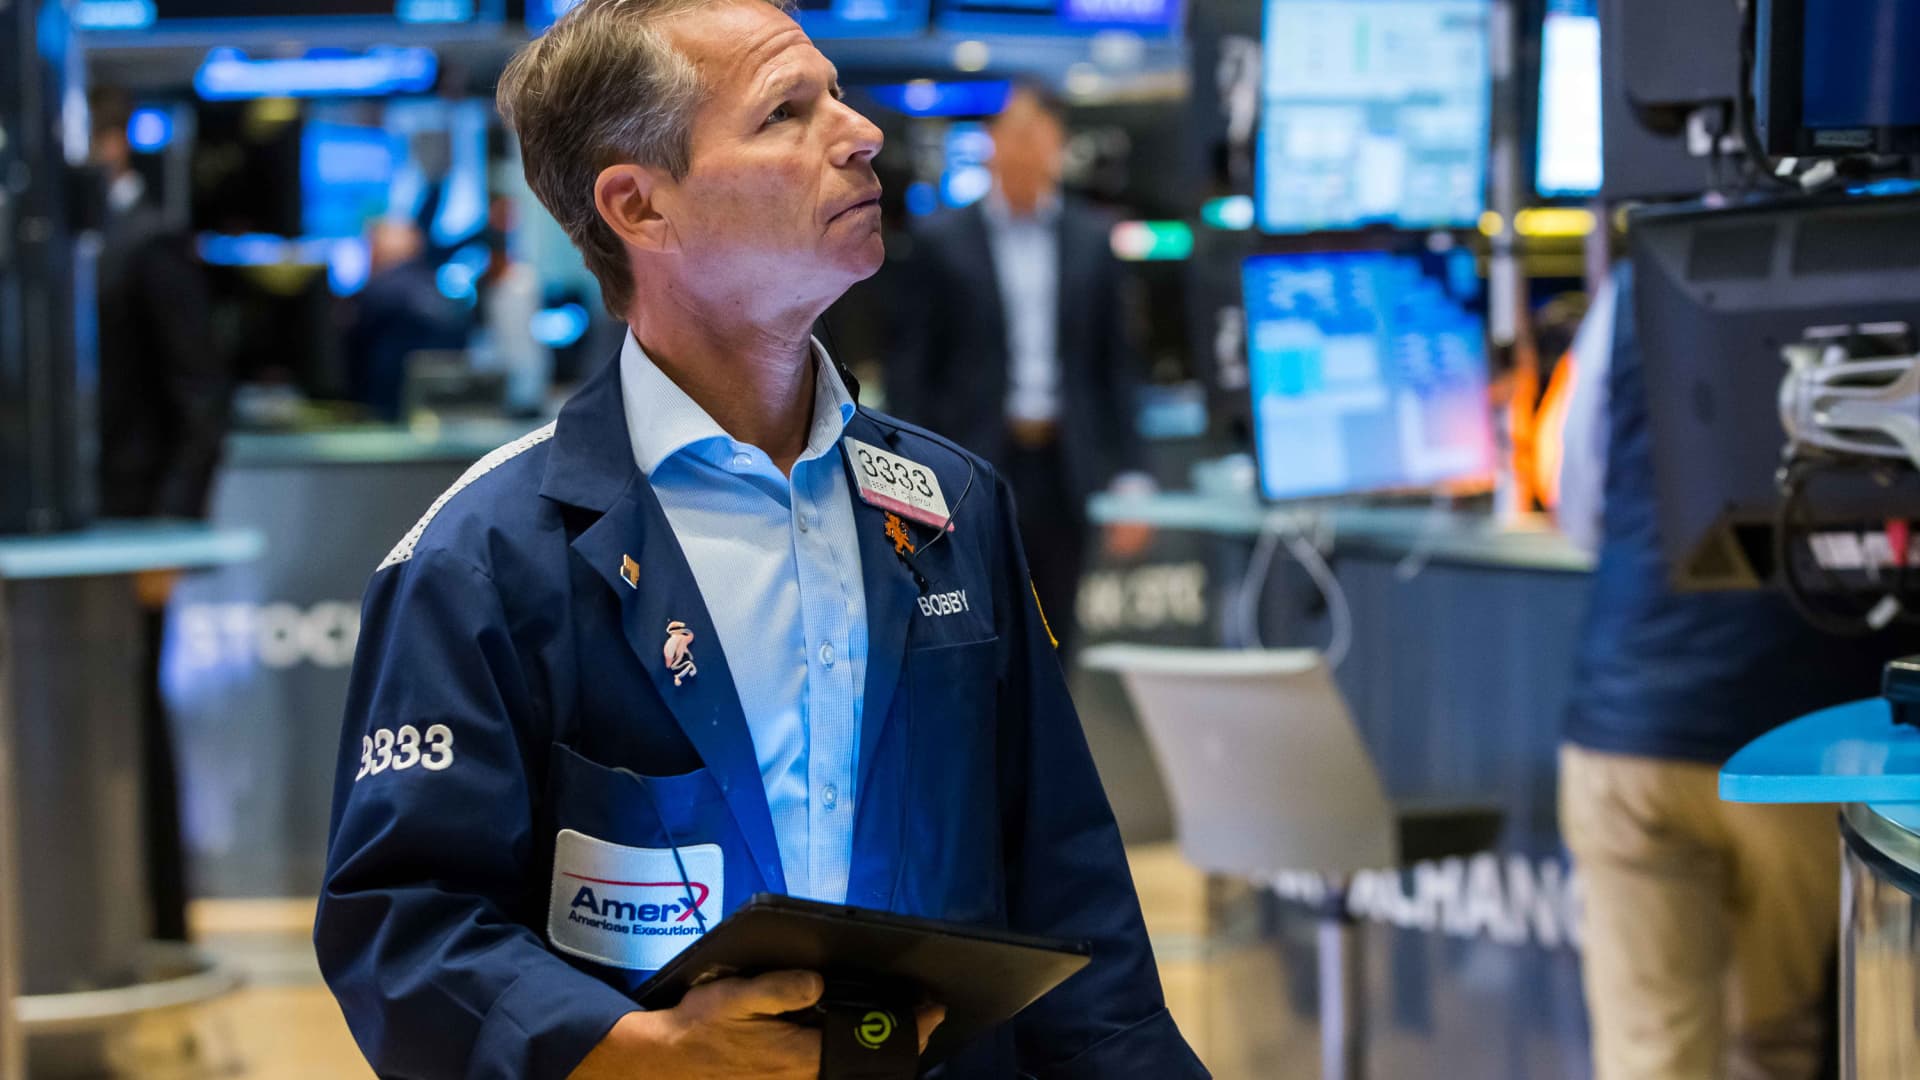 Stock futures are higher as Wall Street awaits key inflation report